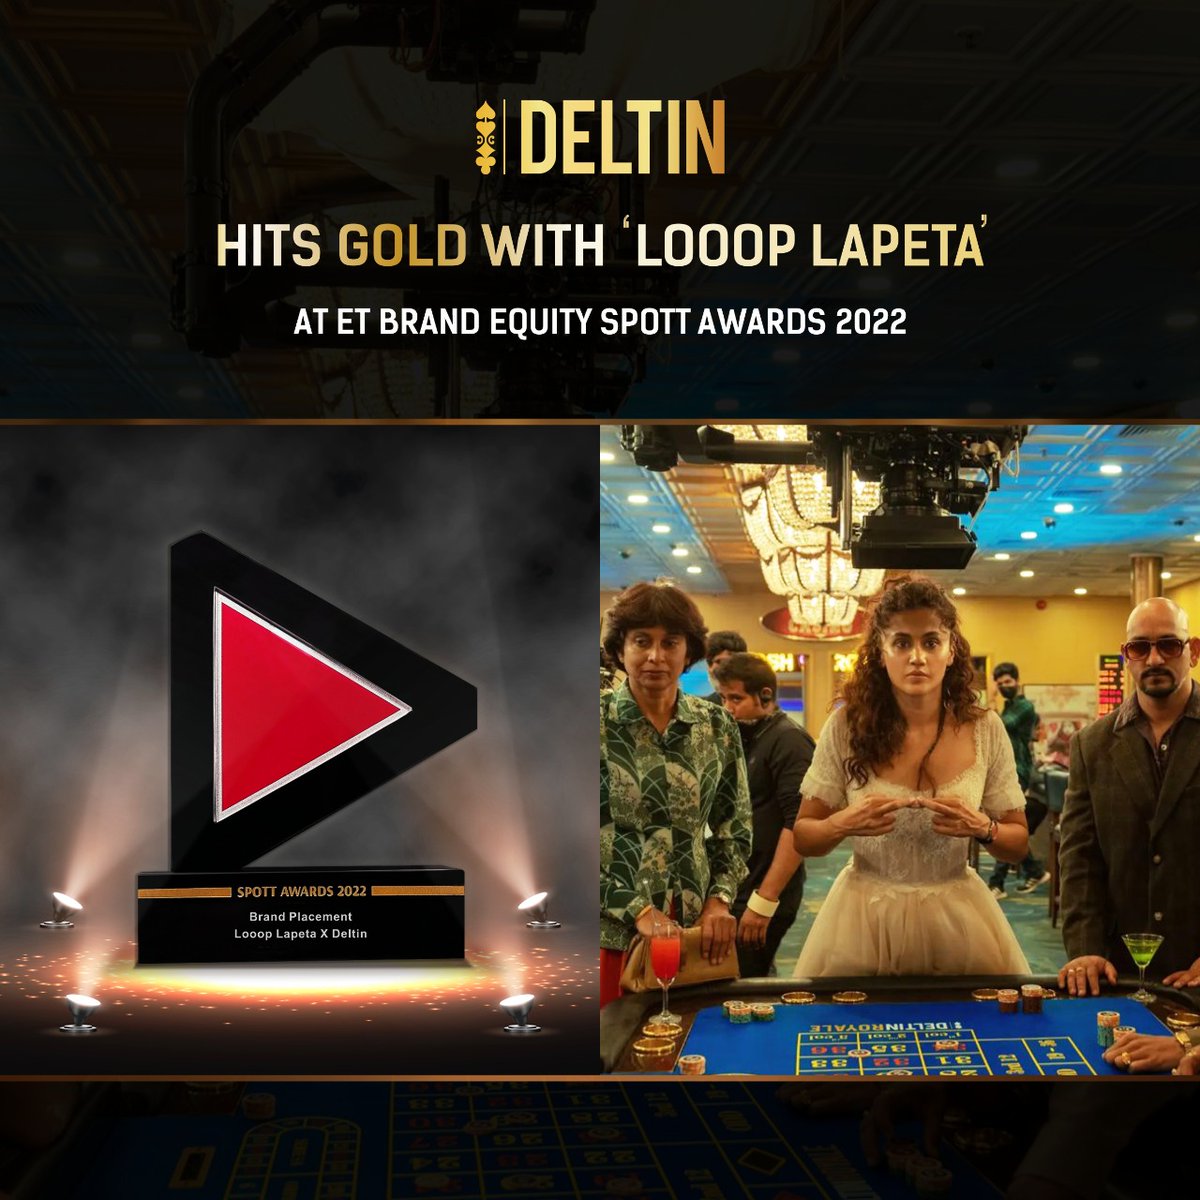 Another feather in our cap. The seamless brand collab between @TheDeltinLife and 'Looop Lapeta' has bagged a GOLD at the @ETBrandEquity Spott Awards, 2022. Thank you @EconomicTimes for recognizing our win-win marketing integration. @taapsee #tahirrajbhasin @sonypicsfilmsin